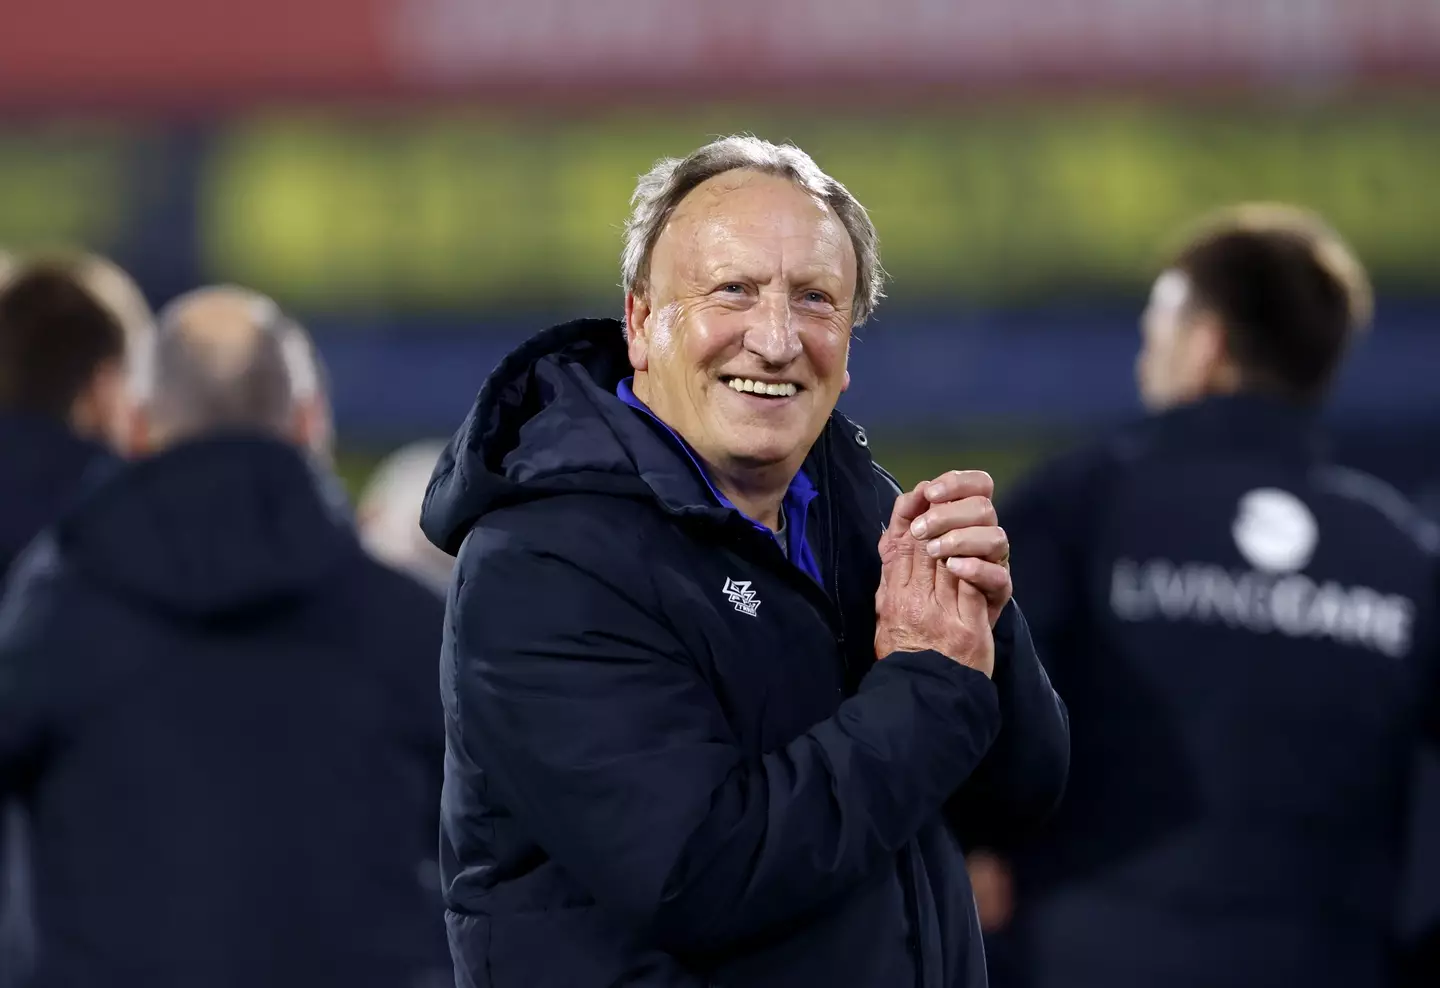 Neil Warnock is now currently the manager of Huddersfield Town. (